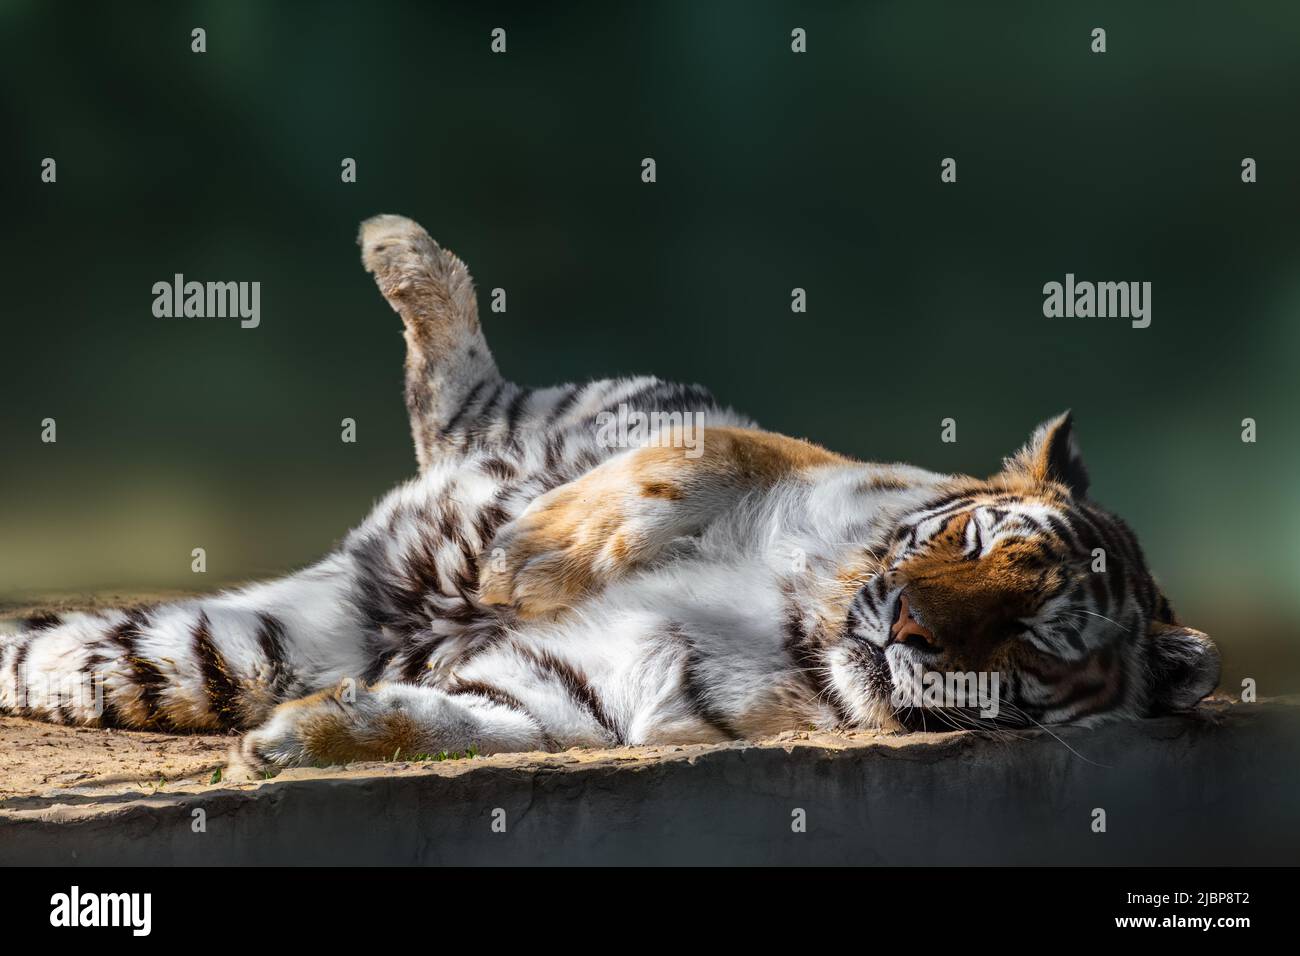 Tiger (Panthera tigris) with dark stripes on orange fur with a white underside peacefully sleeping. Close view with blurred green background. Wild ani Stock Photo